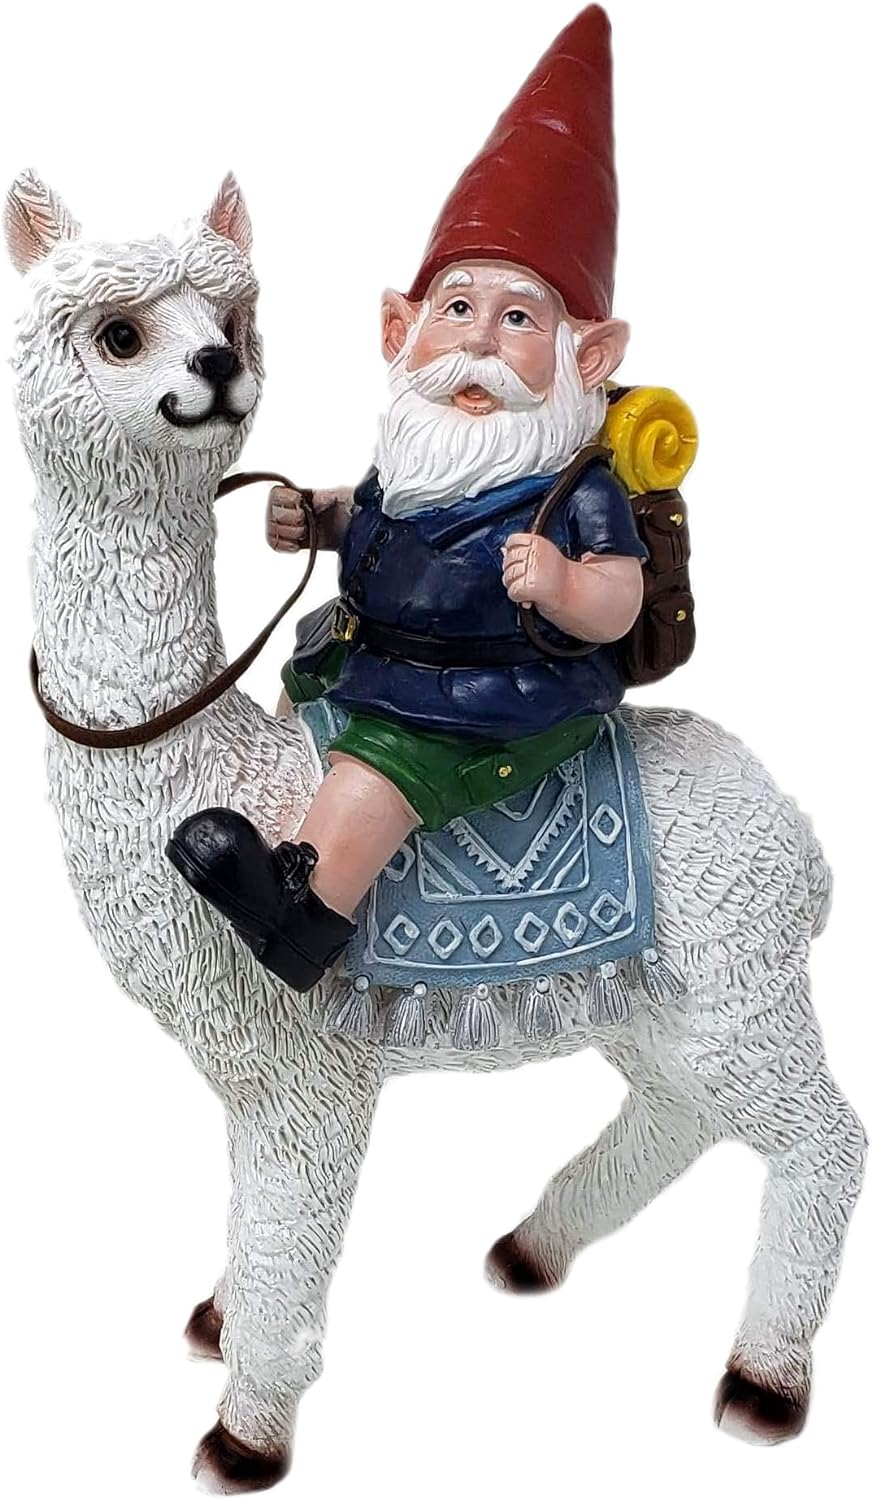 Gnome and a Llama Statue- Indoor/Outdoor Garden Gnome Sculpture for Patio, Yard or Lawn